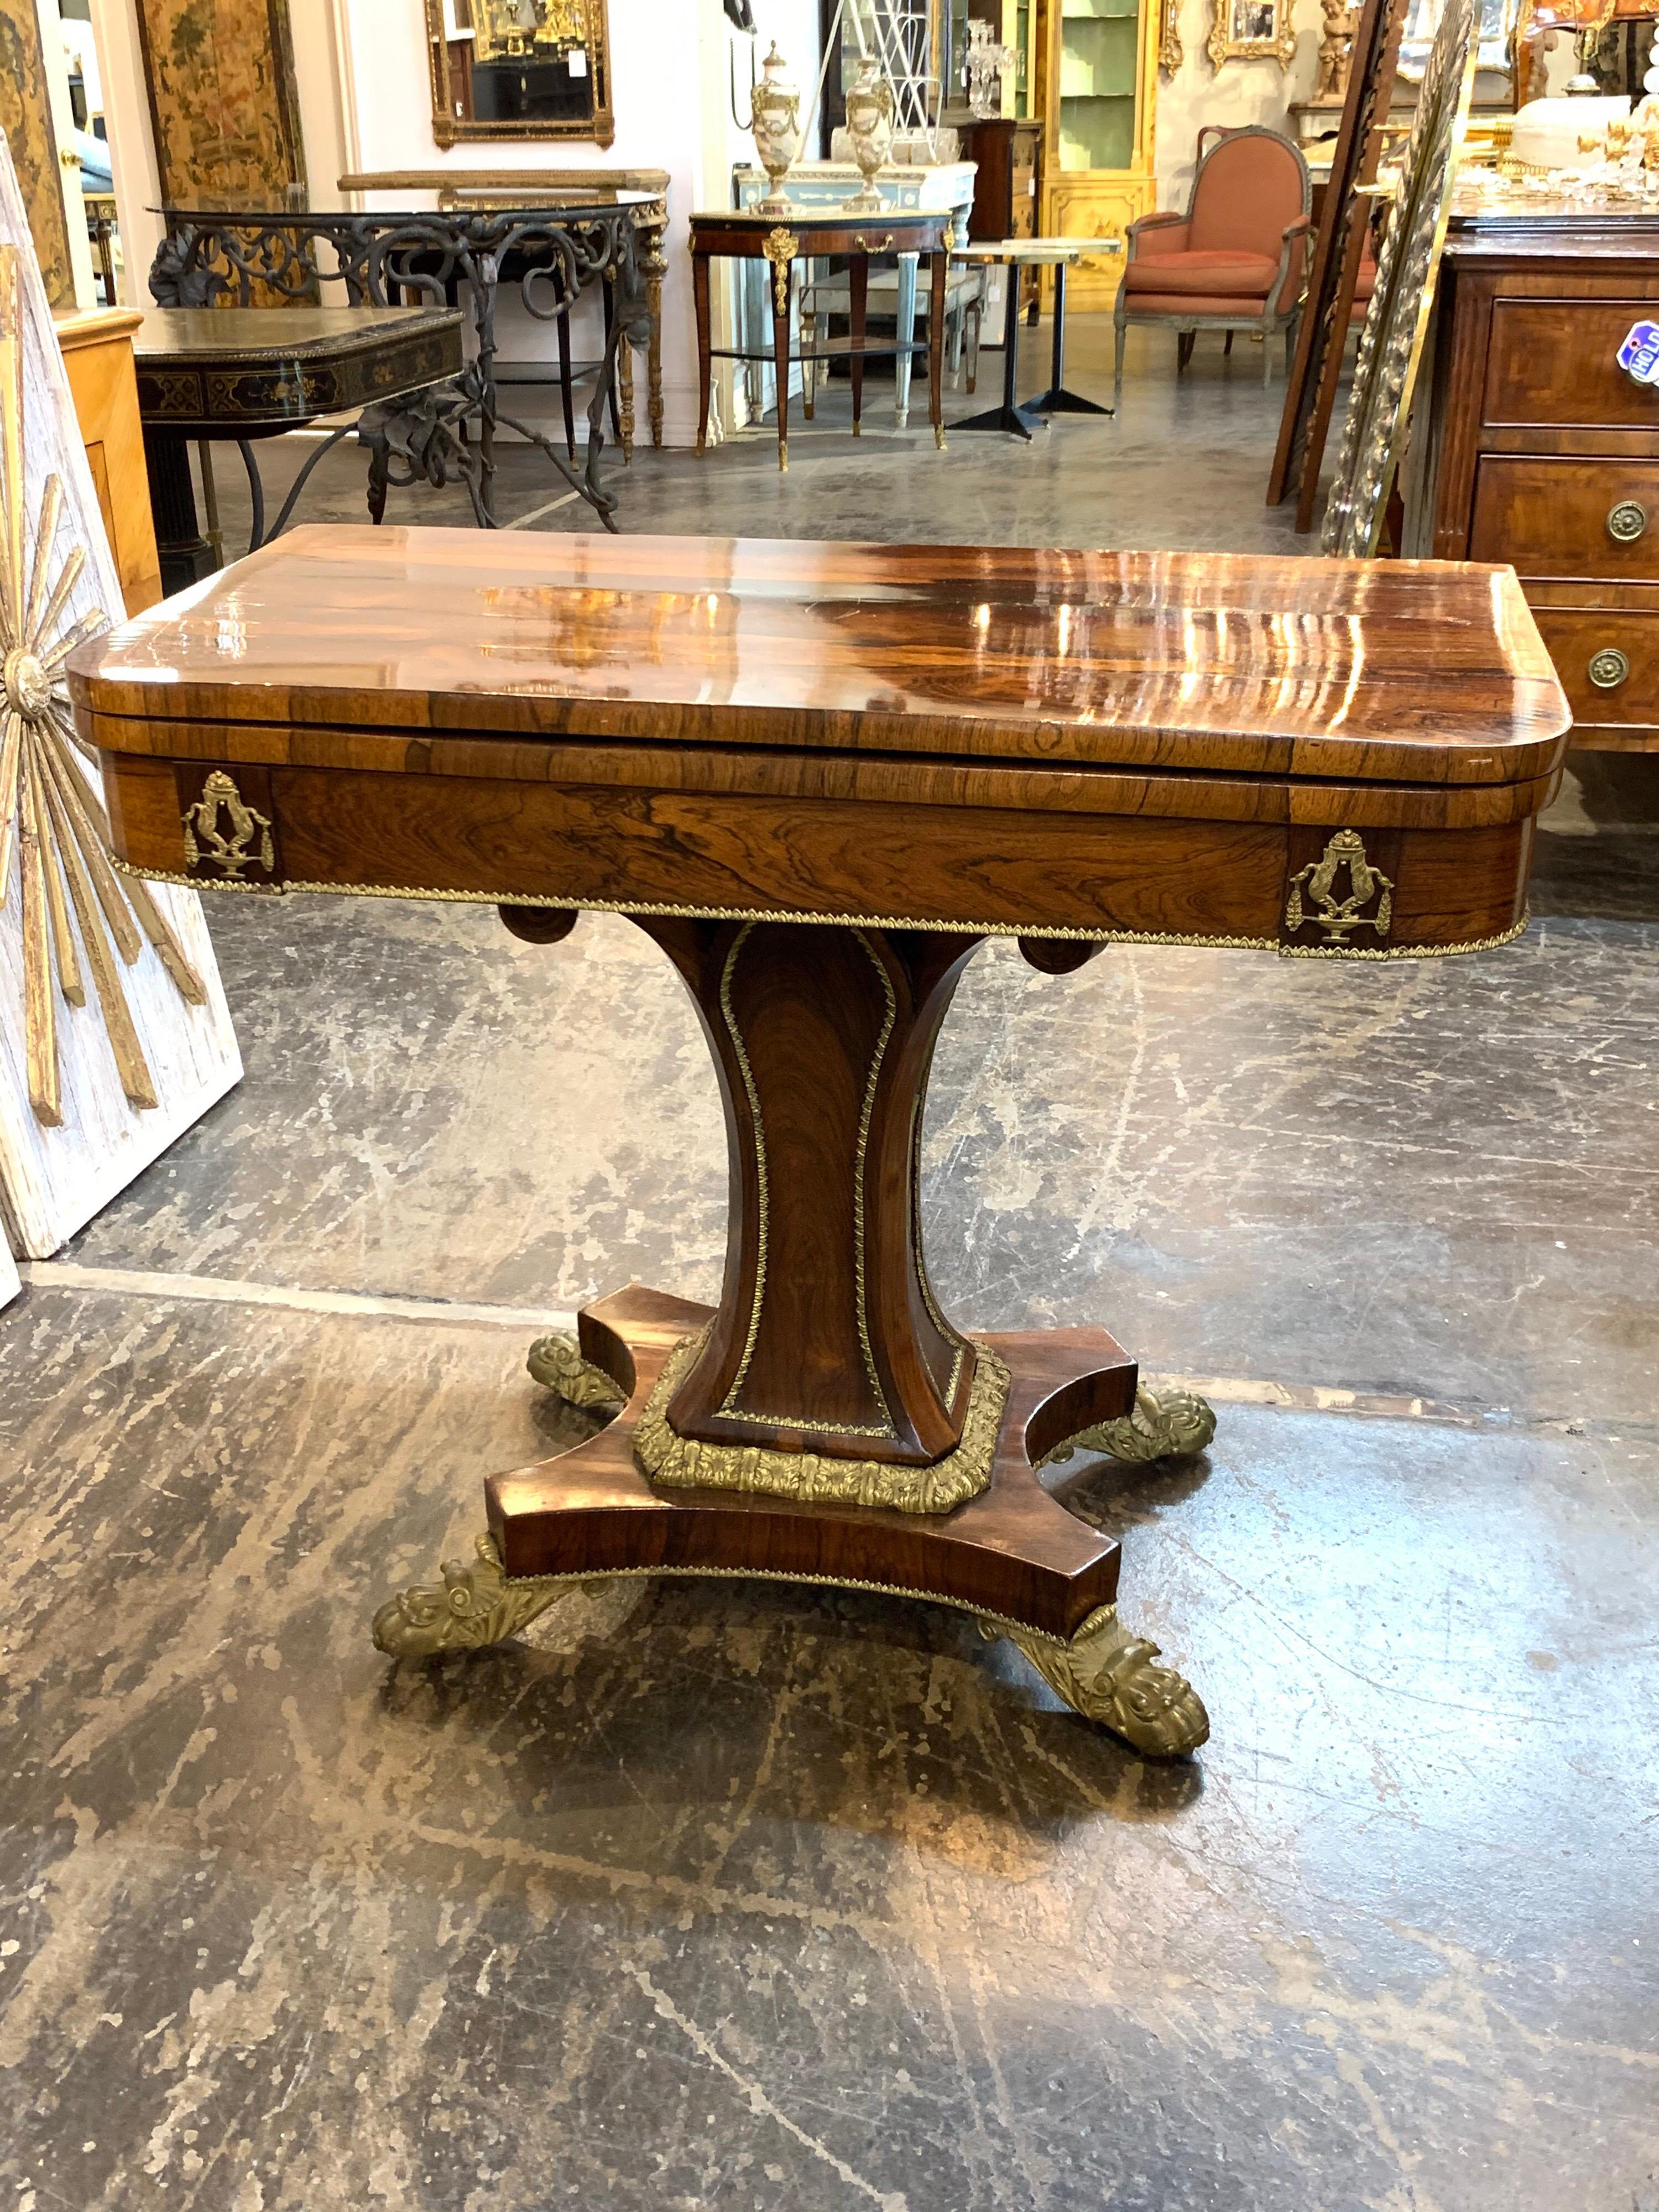 Exceptional 19th century French rosewood game table with bronze mounts. The table opens up to reveal a leather top. Beautiful wood grain and finish. So elegant!